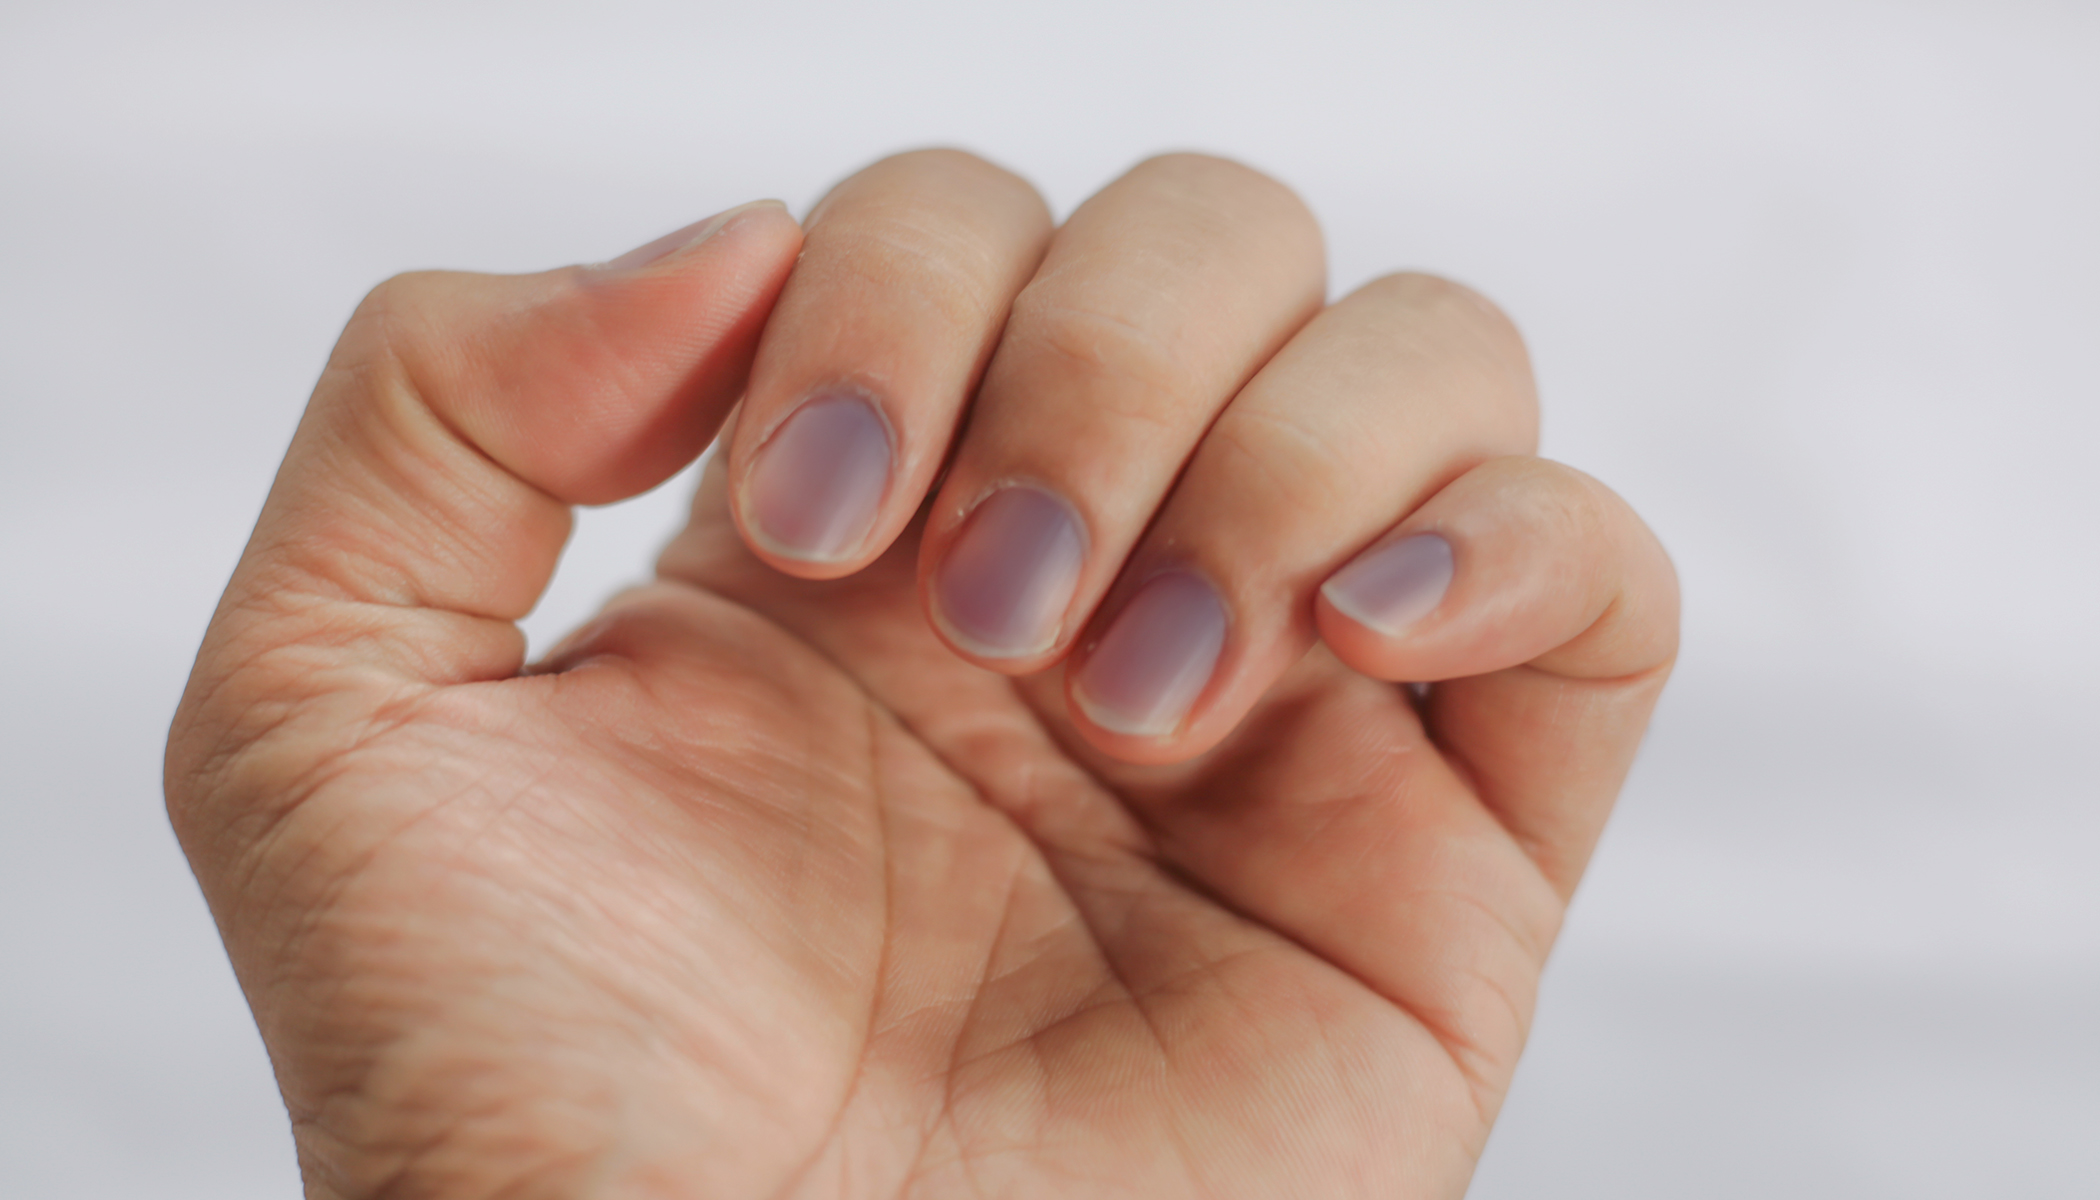 2. How to Keep Your Nails Healthy While Wearing Dark Colors - wide 7